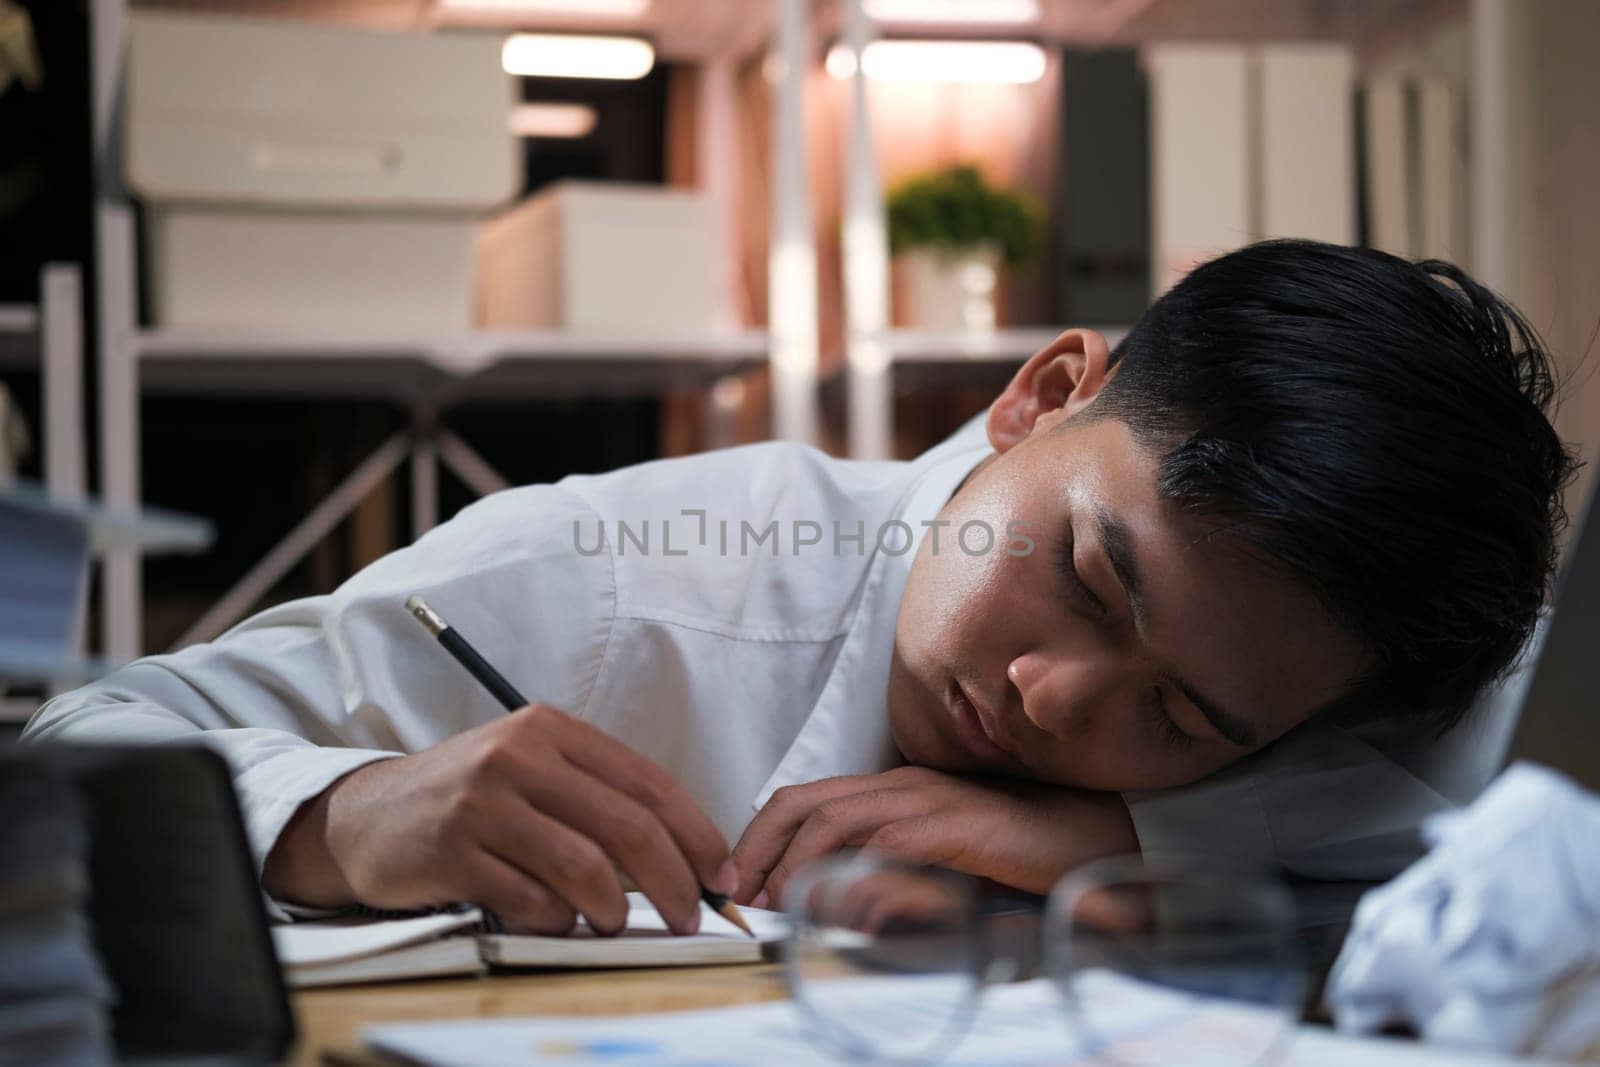 Exhausted businessman sleeping on his office desk, next to laptop and documents, tired of overworking.